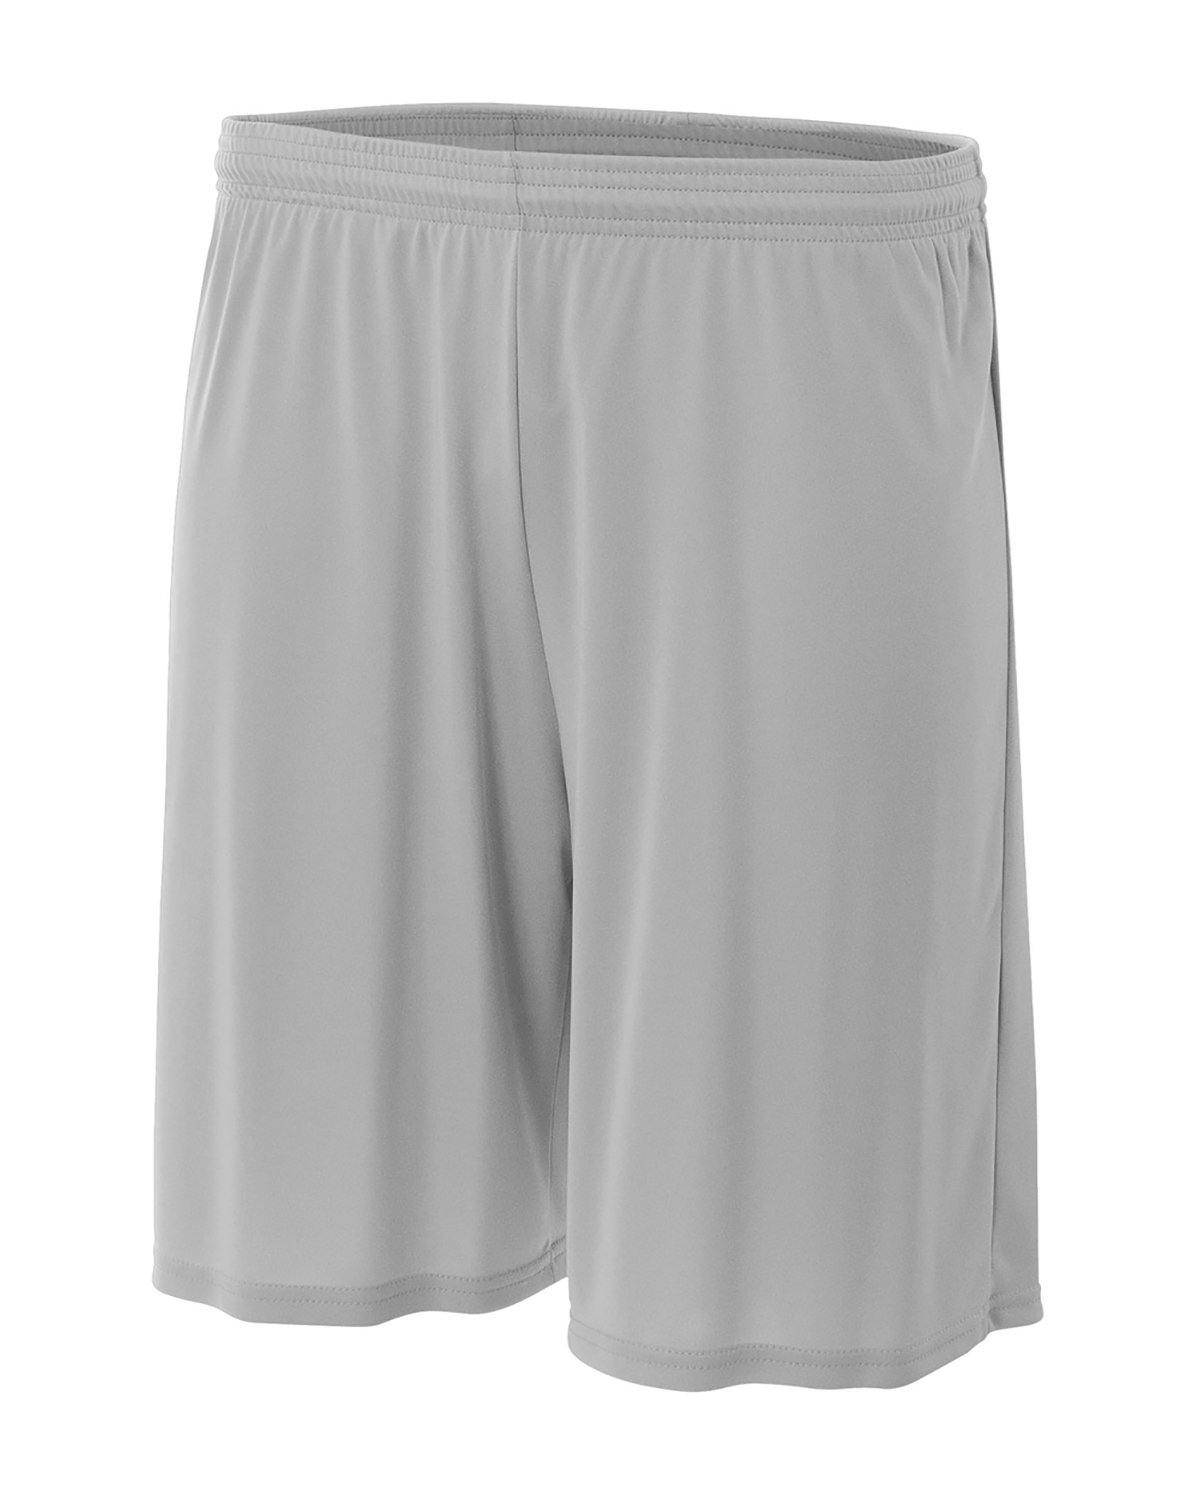 Image for Adult 7" Inseam Cooling Performance Short